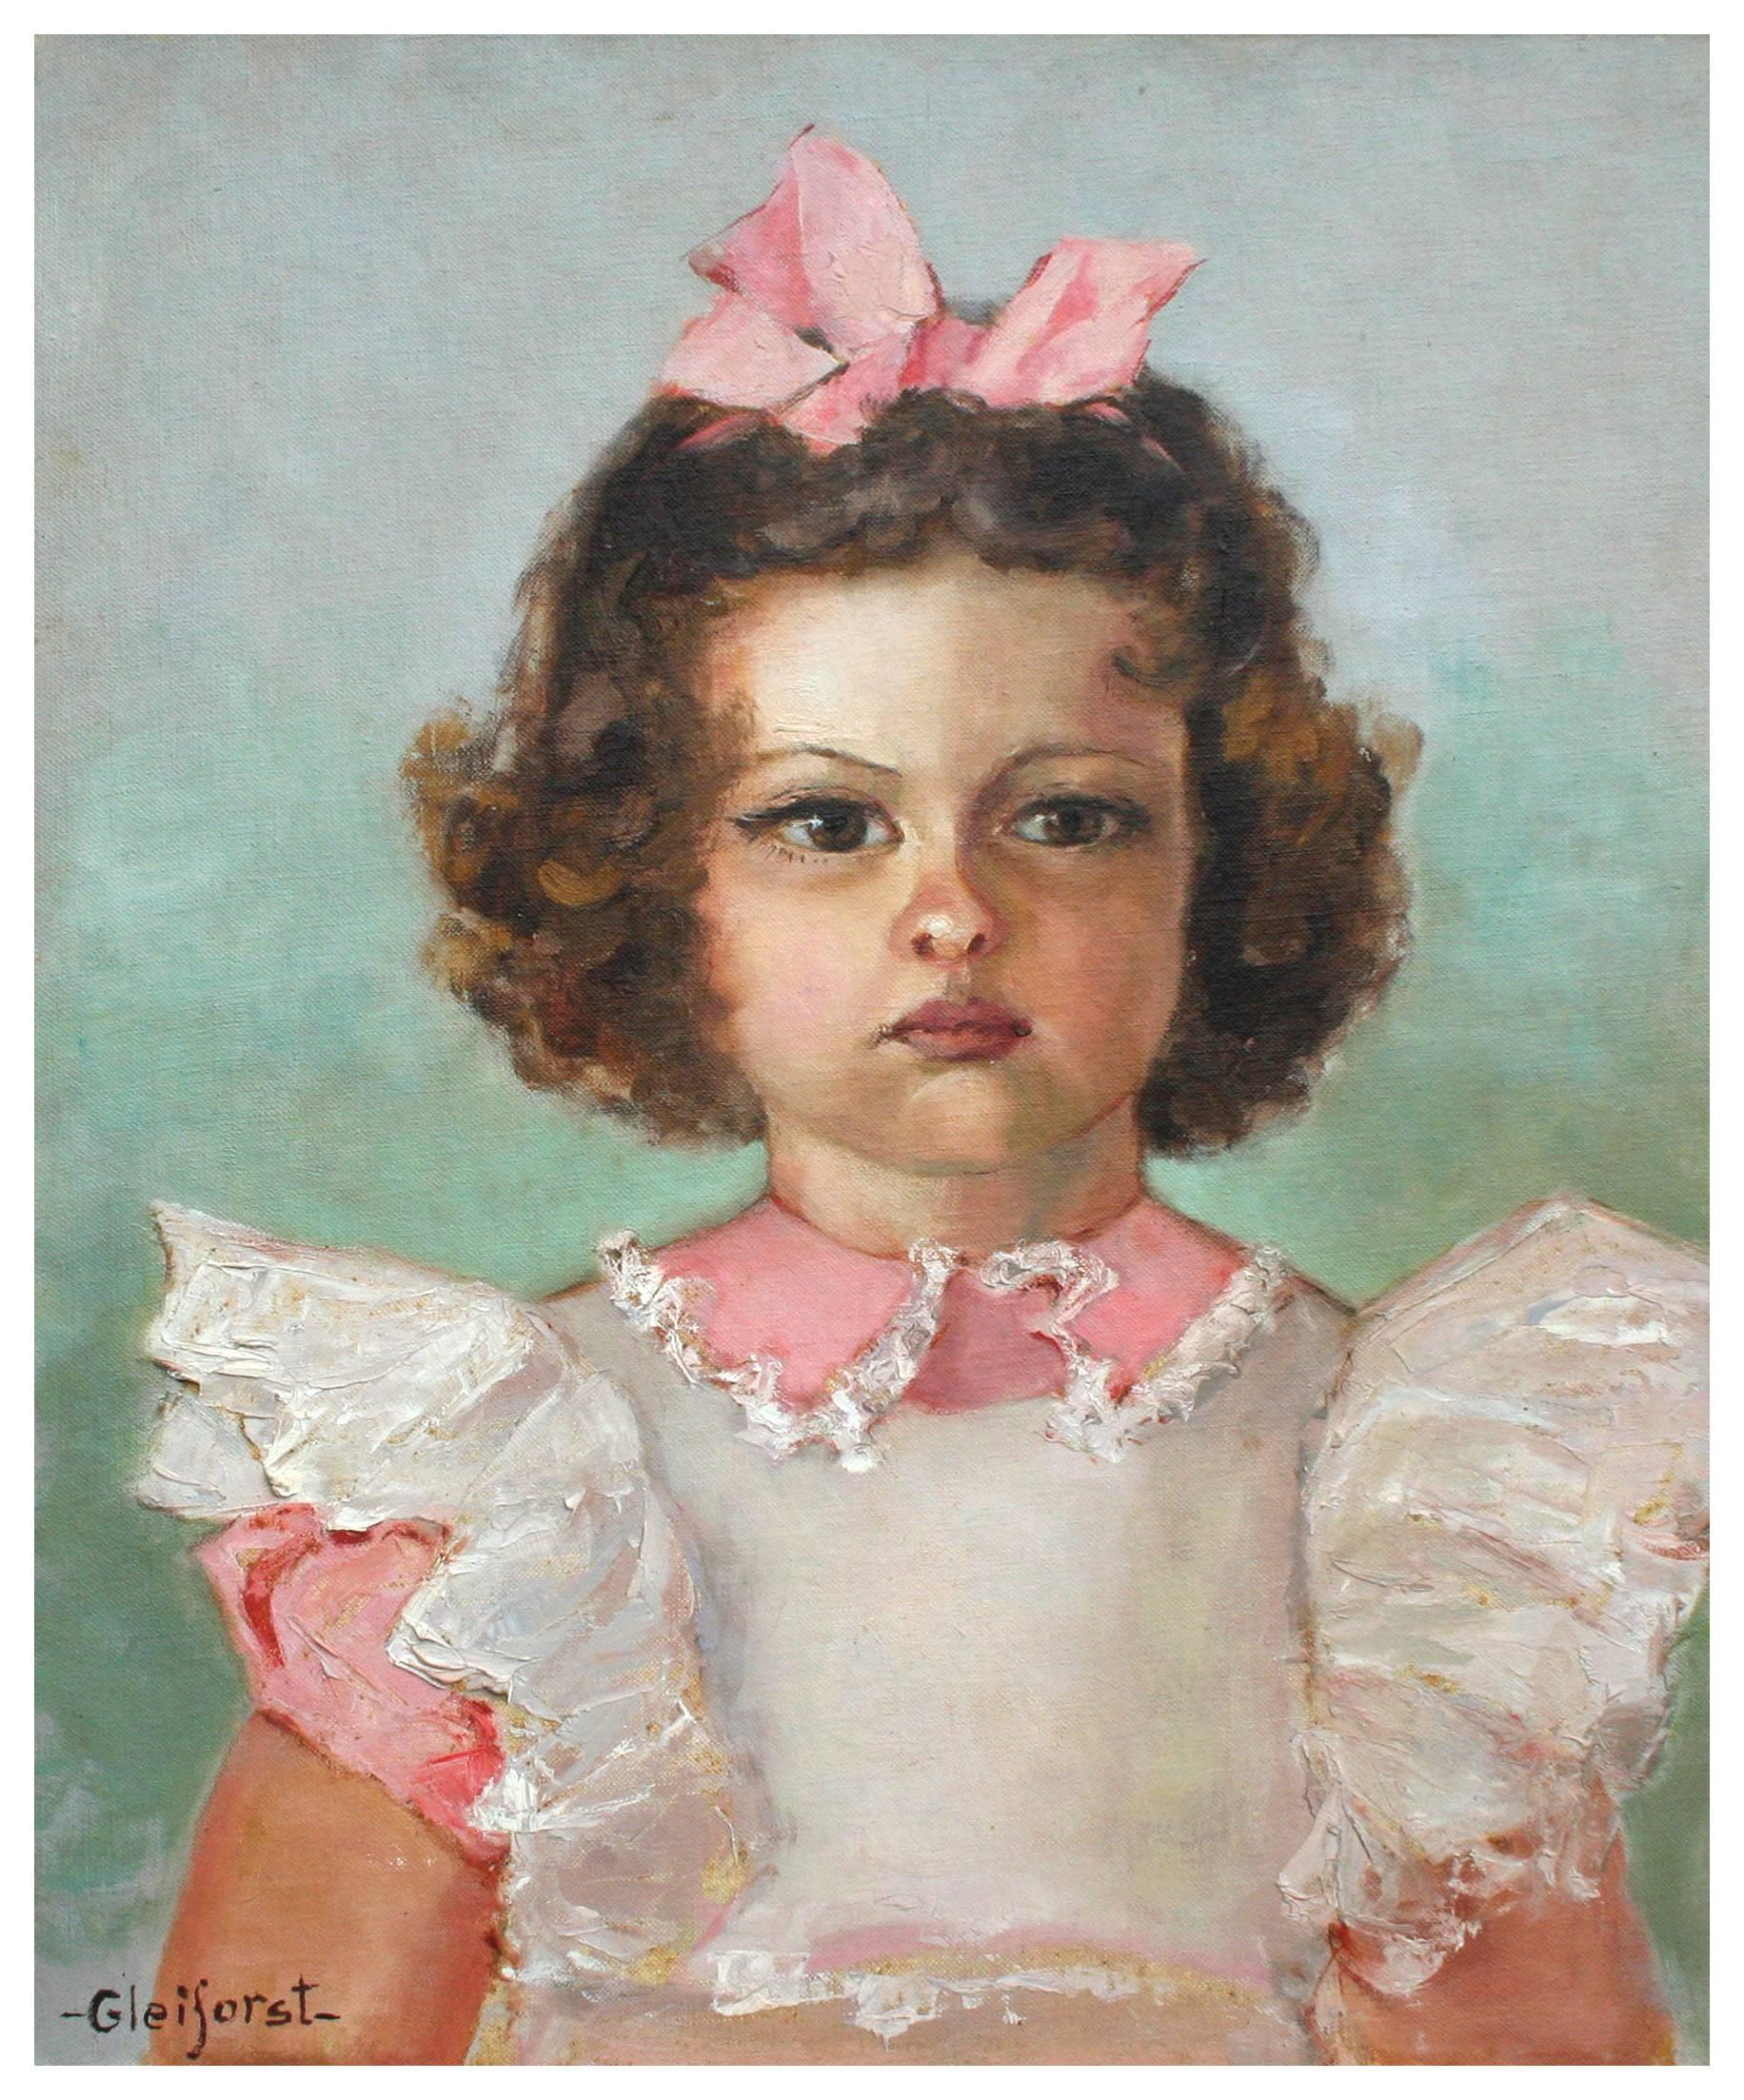 Helen Enoch Gleiforst Portrait Painting - Early 20th Century Young Girl With Pink Bow Portrait